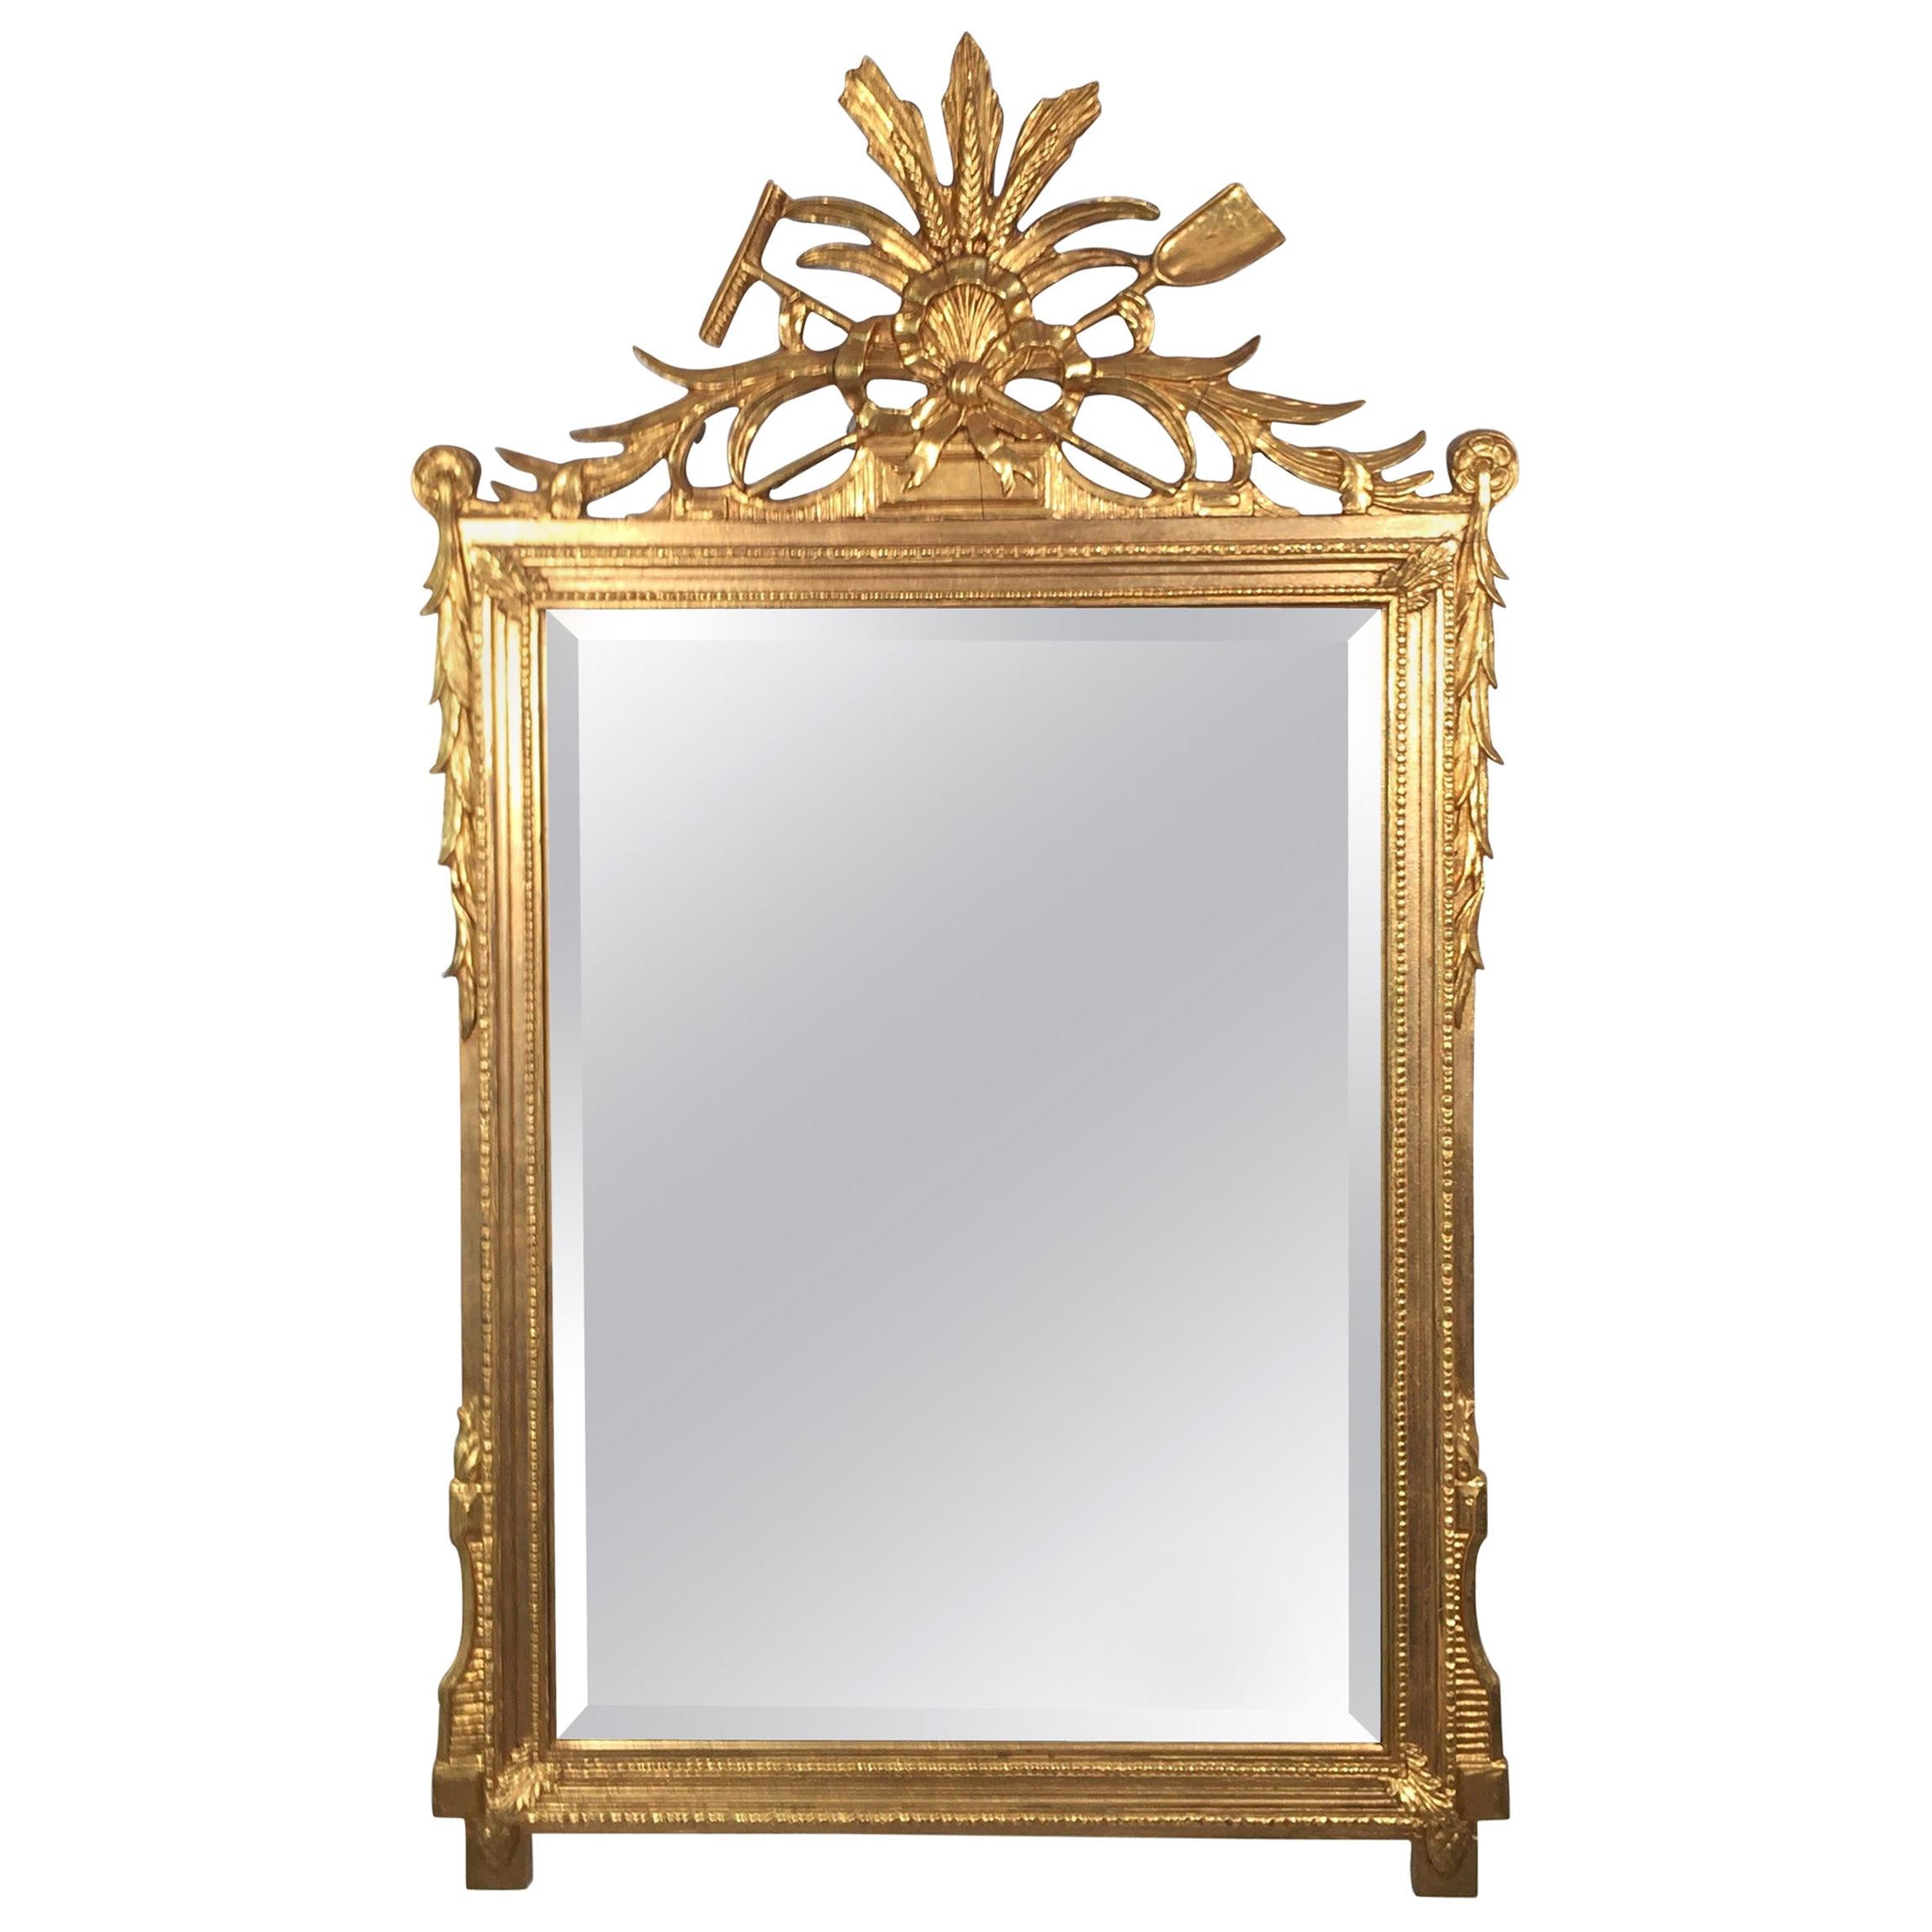 Beautiful Carved Gold Gilt French Style Mirror by Friedman Brothers, circa 1940s